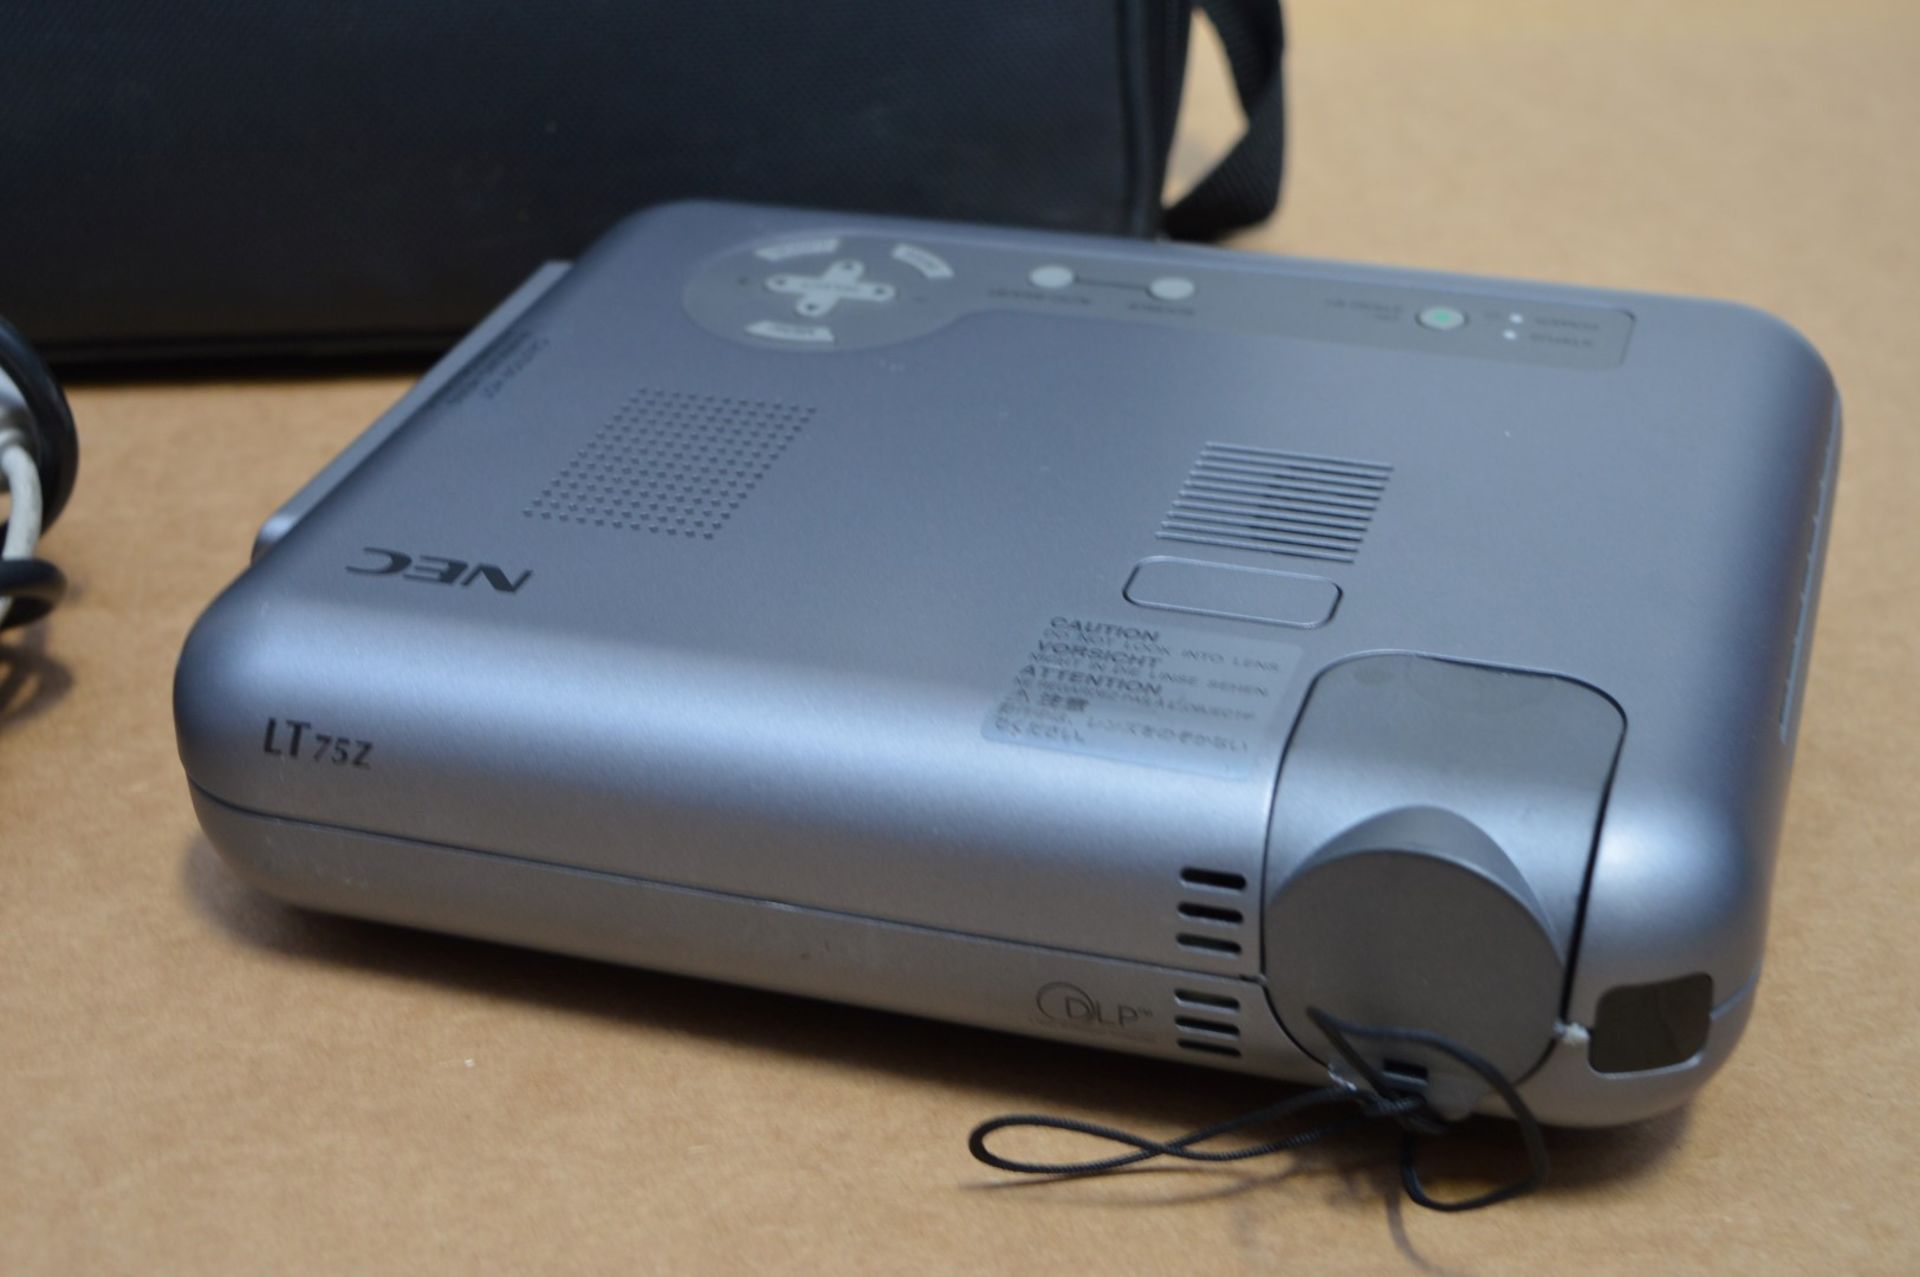 1 x NEC Micro Portable Projector - Model LT75Z - Includes Carry Case, Leads, Remote and User - Image 4 of 7